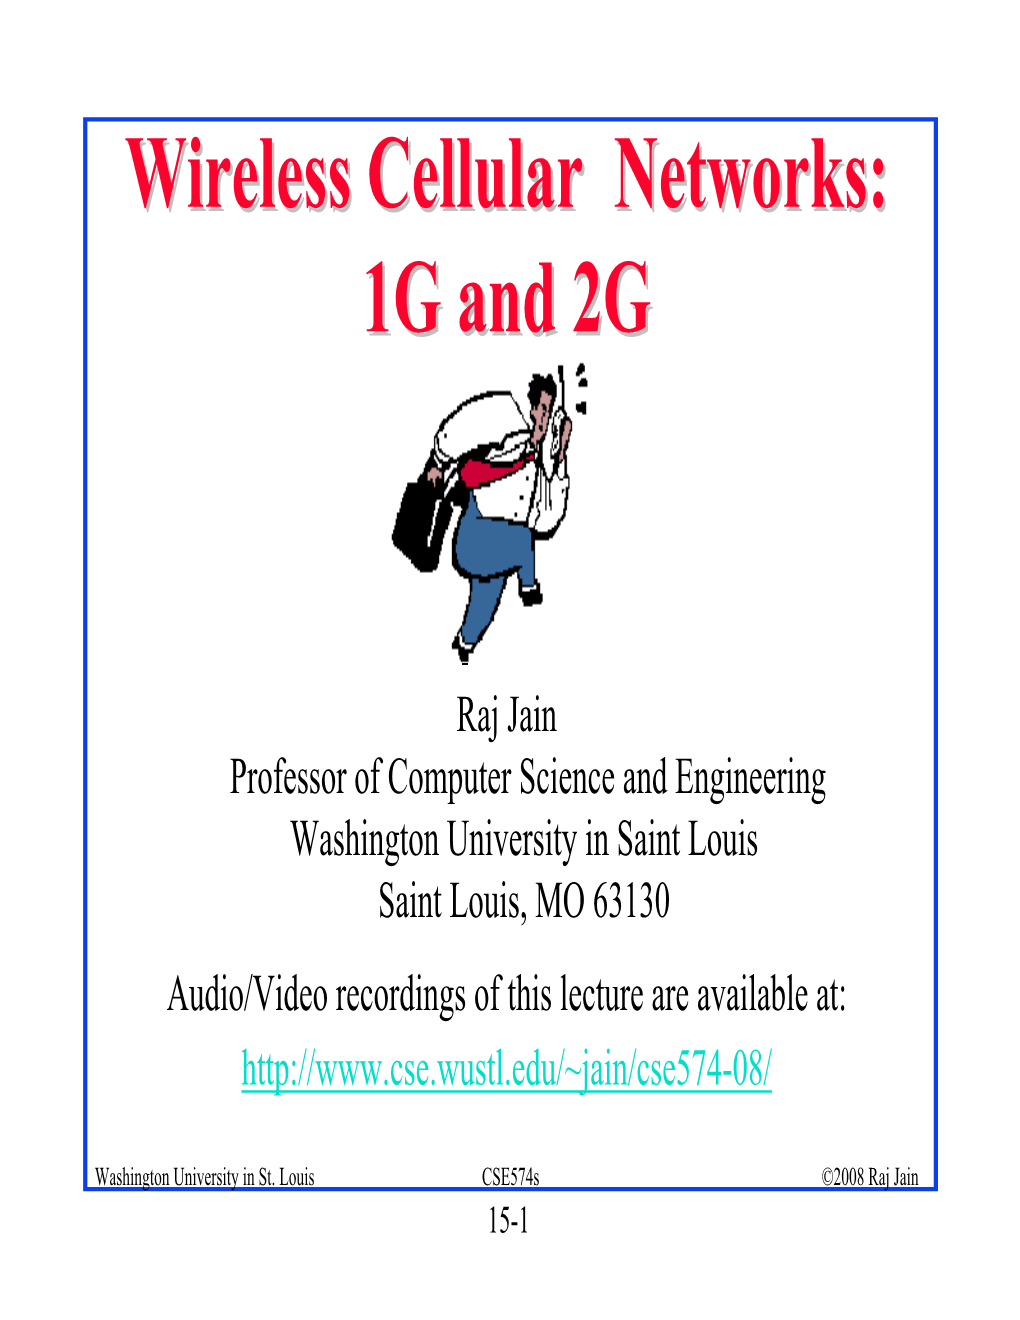 Wireless Cellular Networks: 1G and 2G